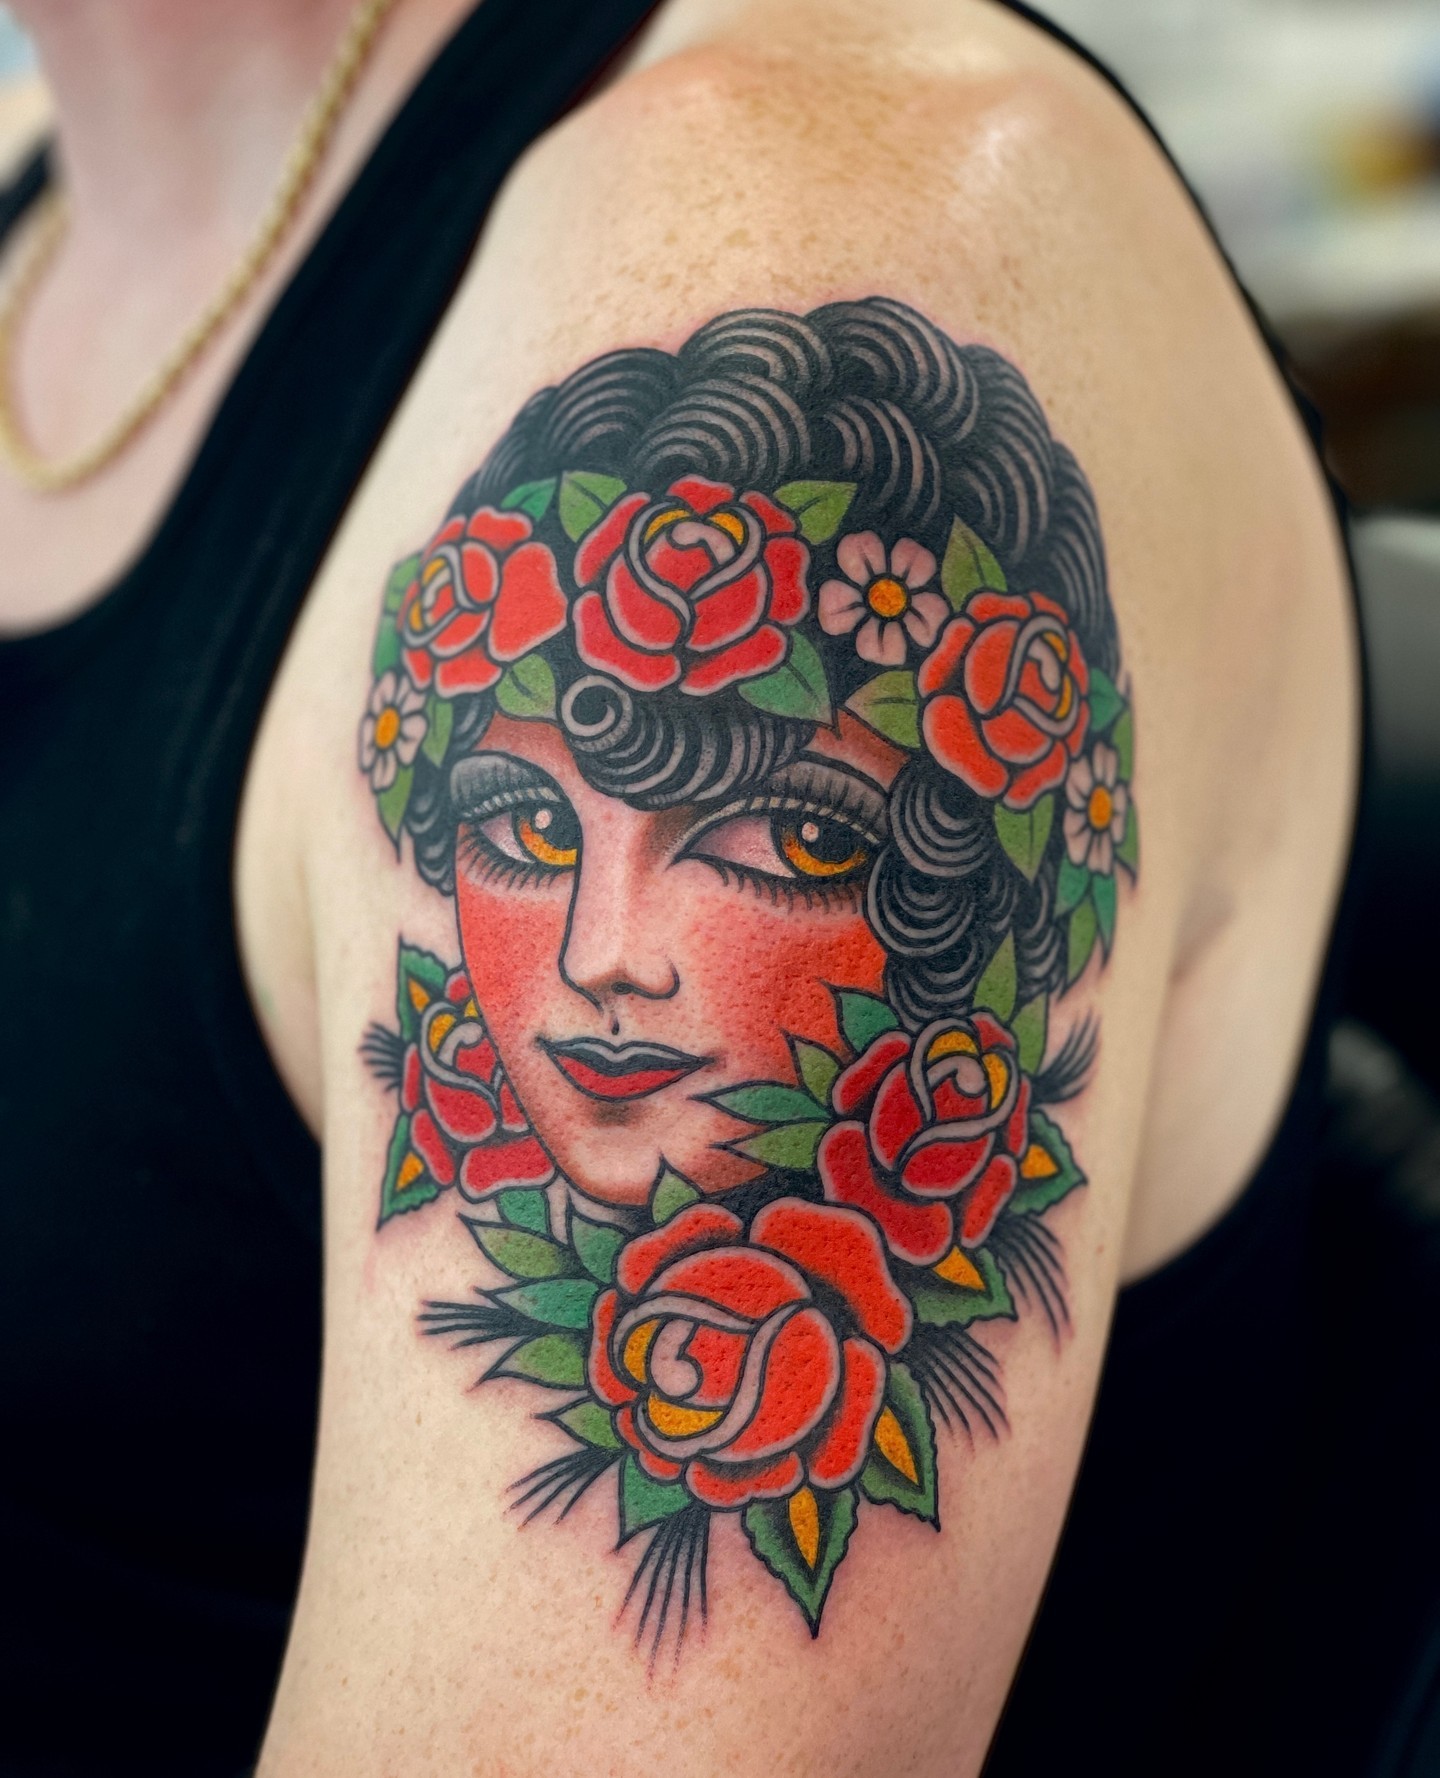 Colorful Gypsy Rose Tattoo on Arm